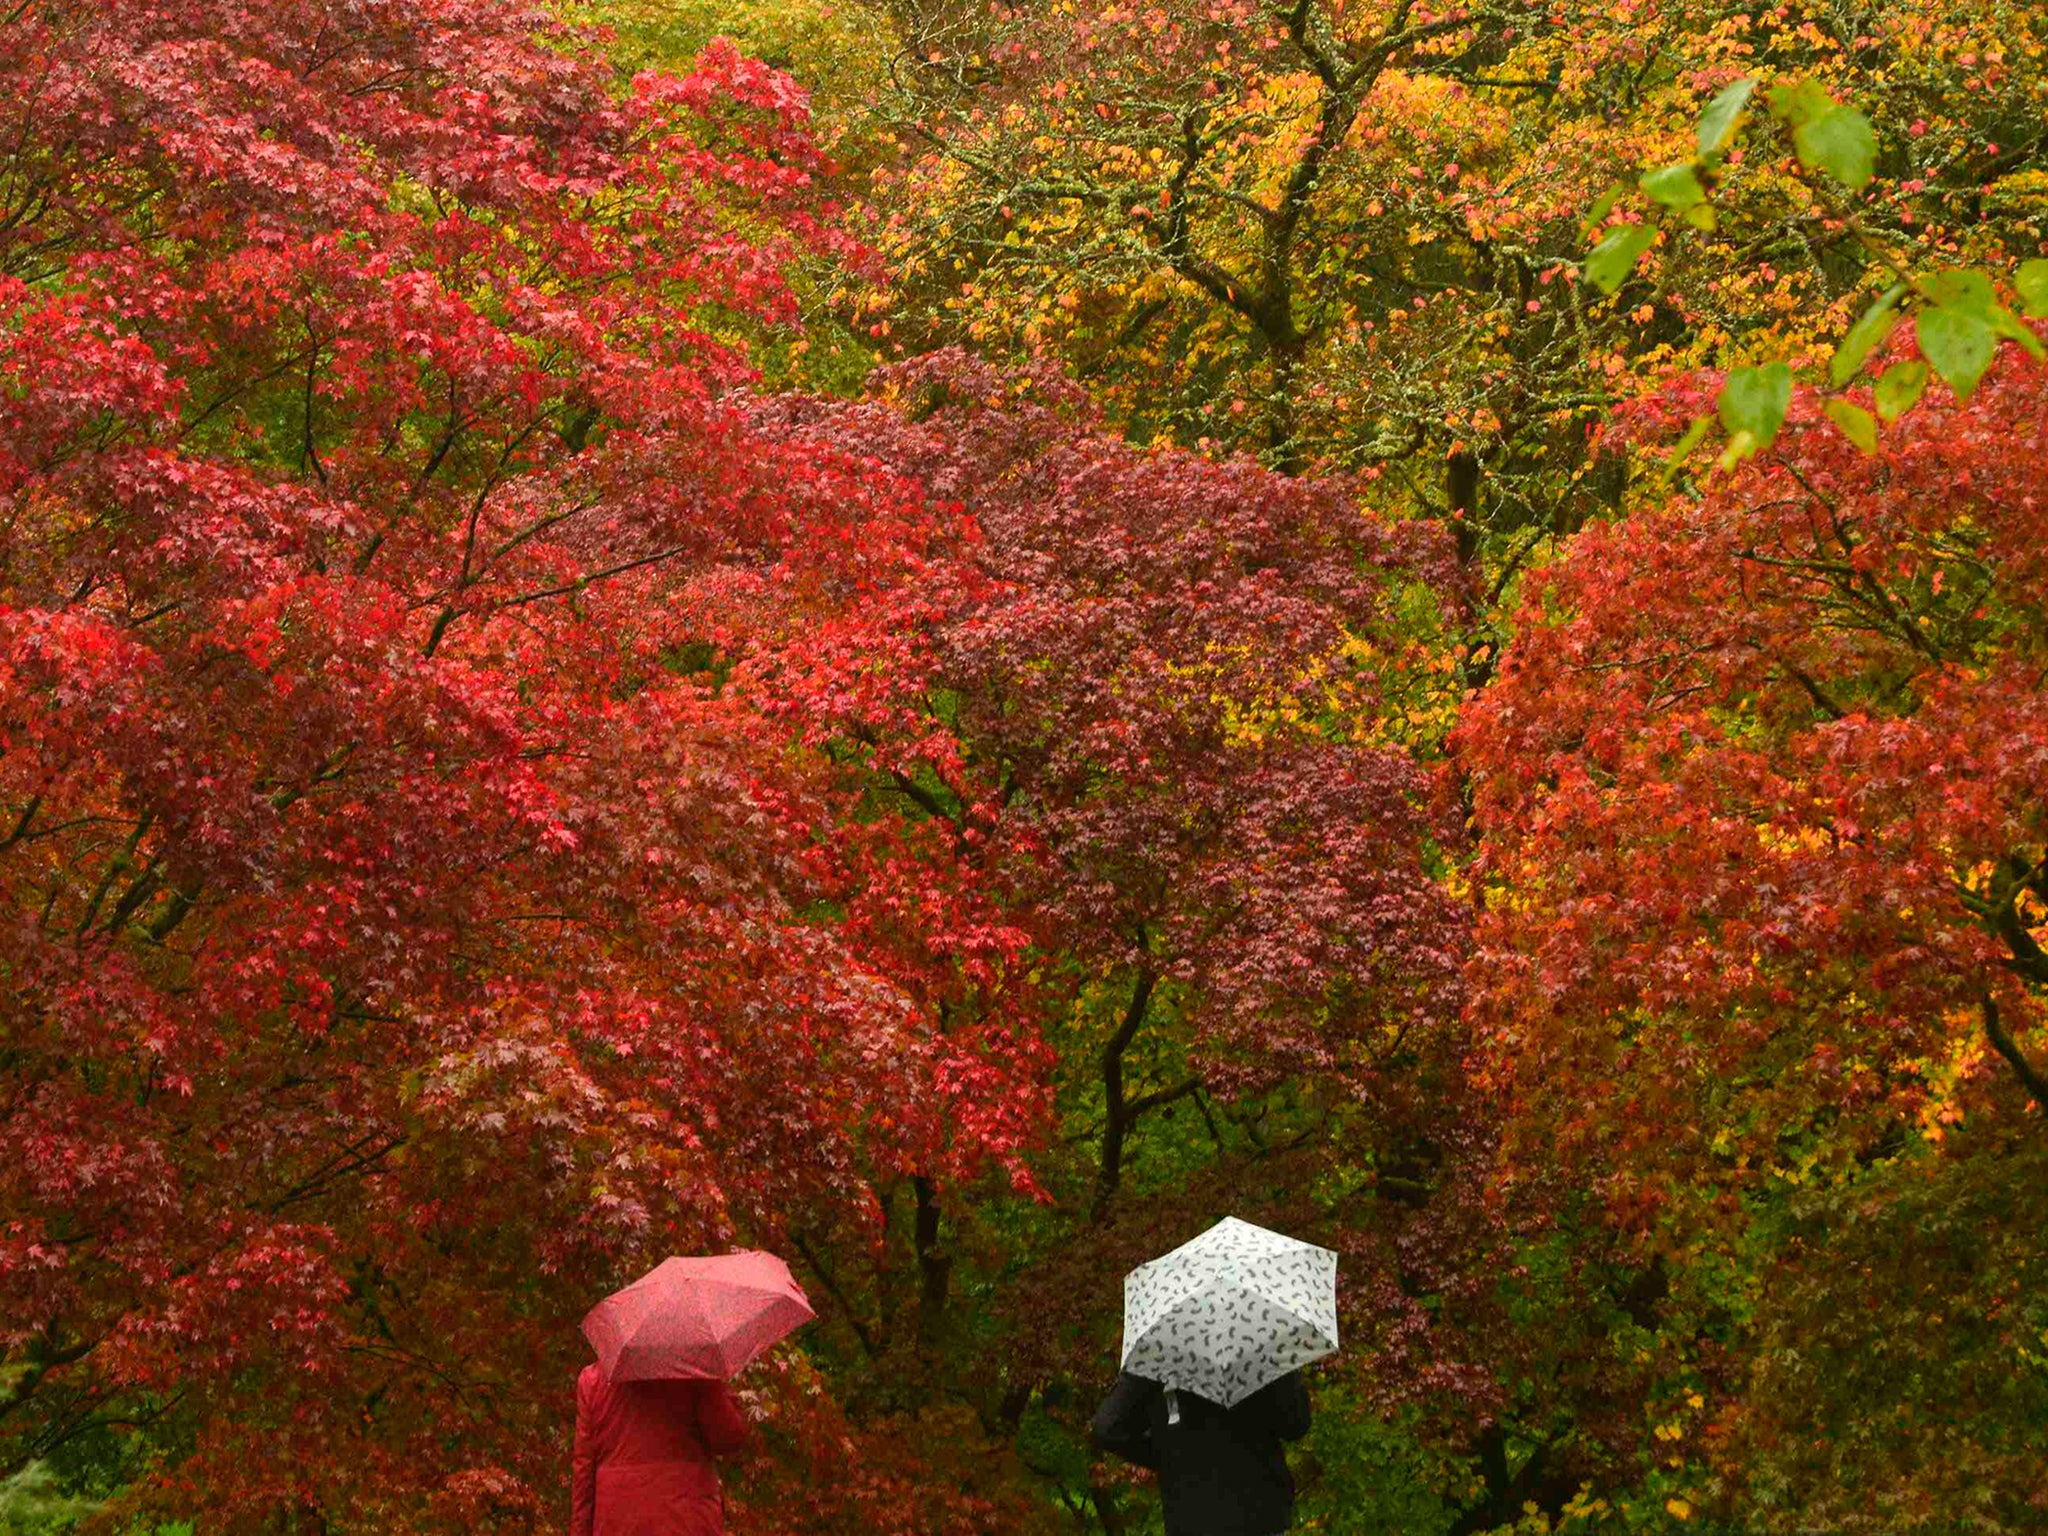 Visitors view the autumn foliage of acer trees in the Old Arboretum at Westonbirt in south west England. The Japanese maples are some of the first species to turn red and orange at this famous tree collection, originally planted out in the nineteenth cent